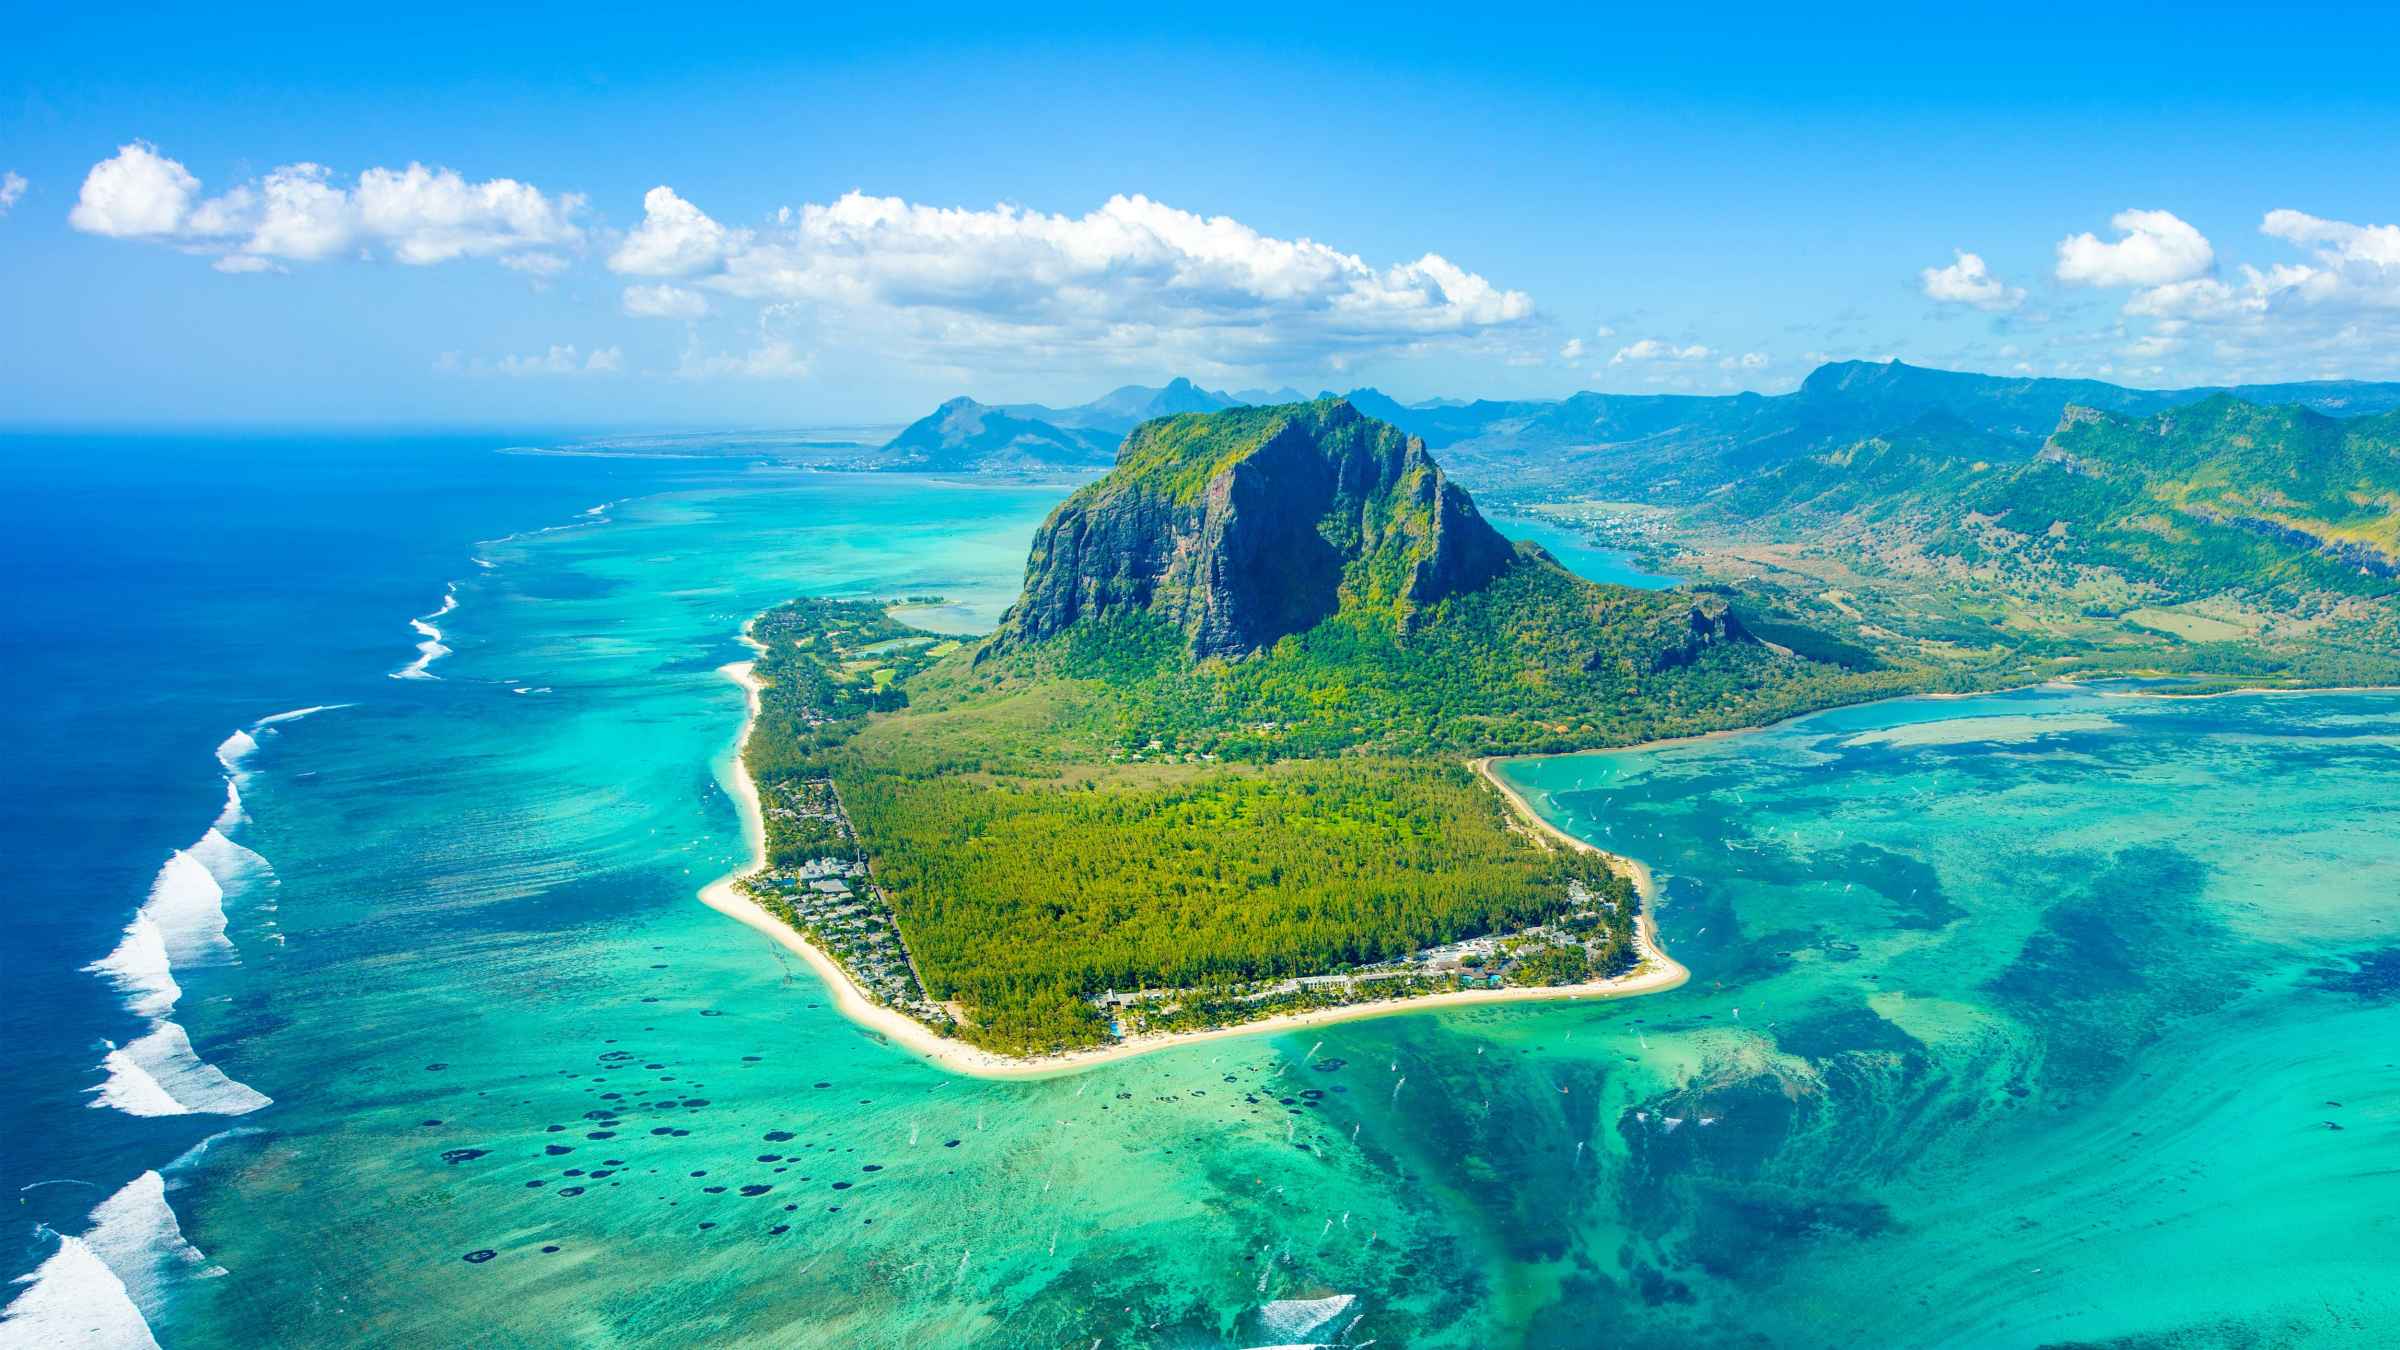 Places to visit in Mauritius